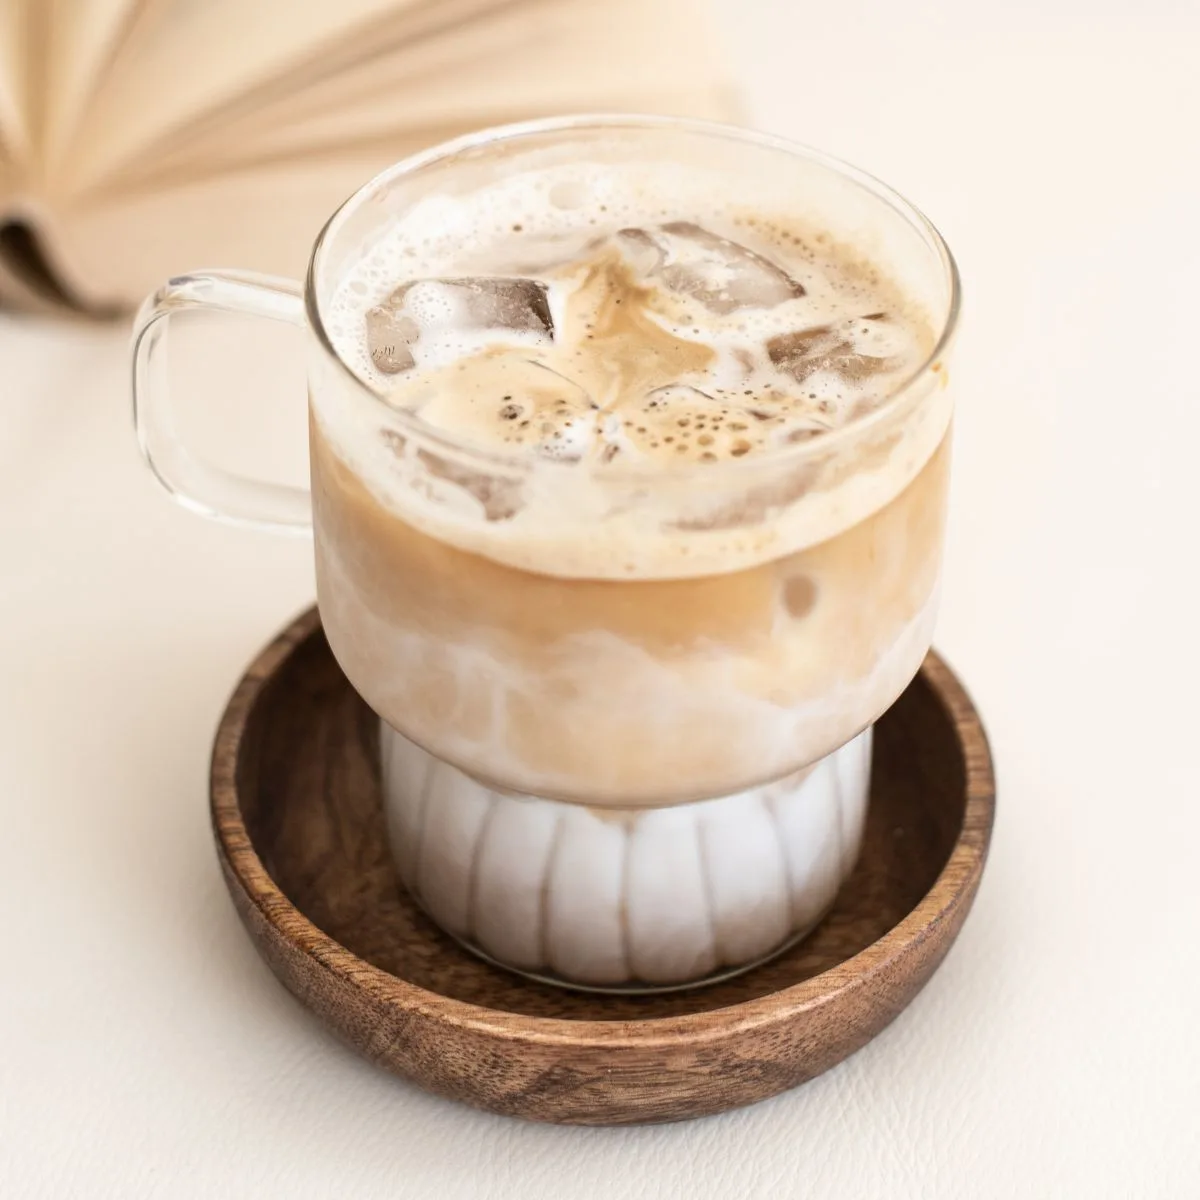 Iced lavender latte in a glass with a wooden coaster